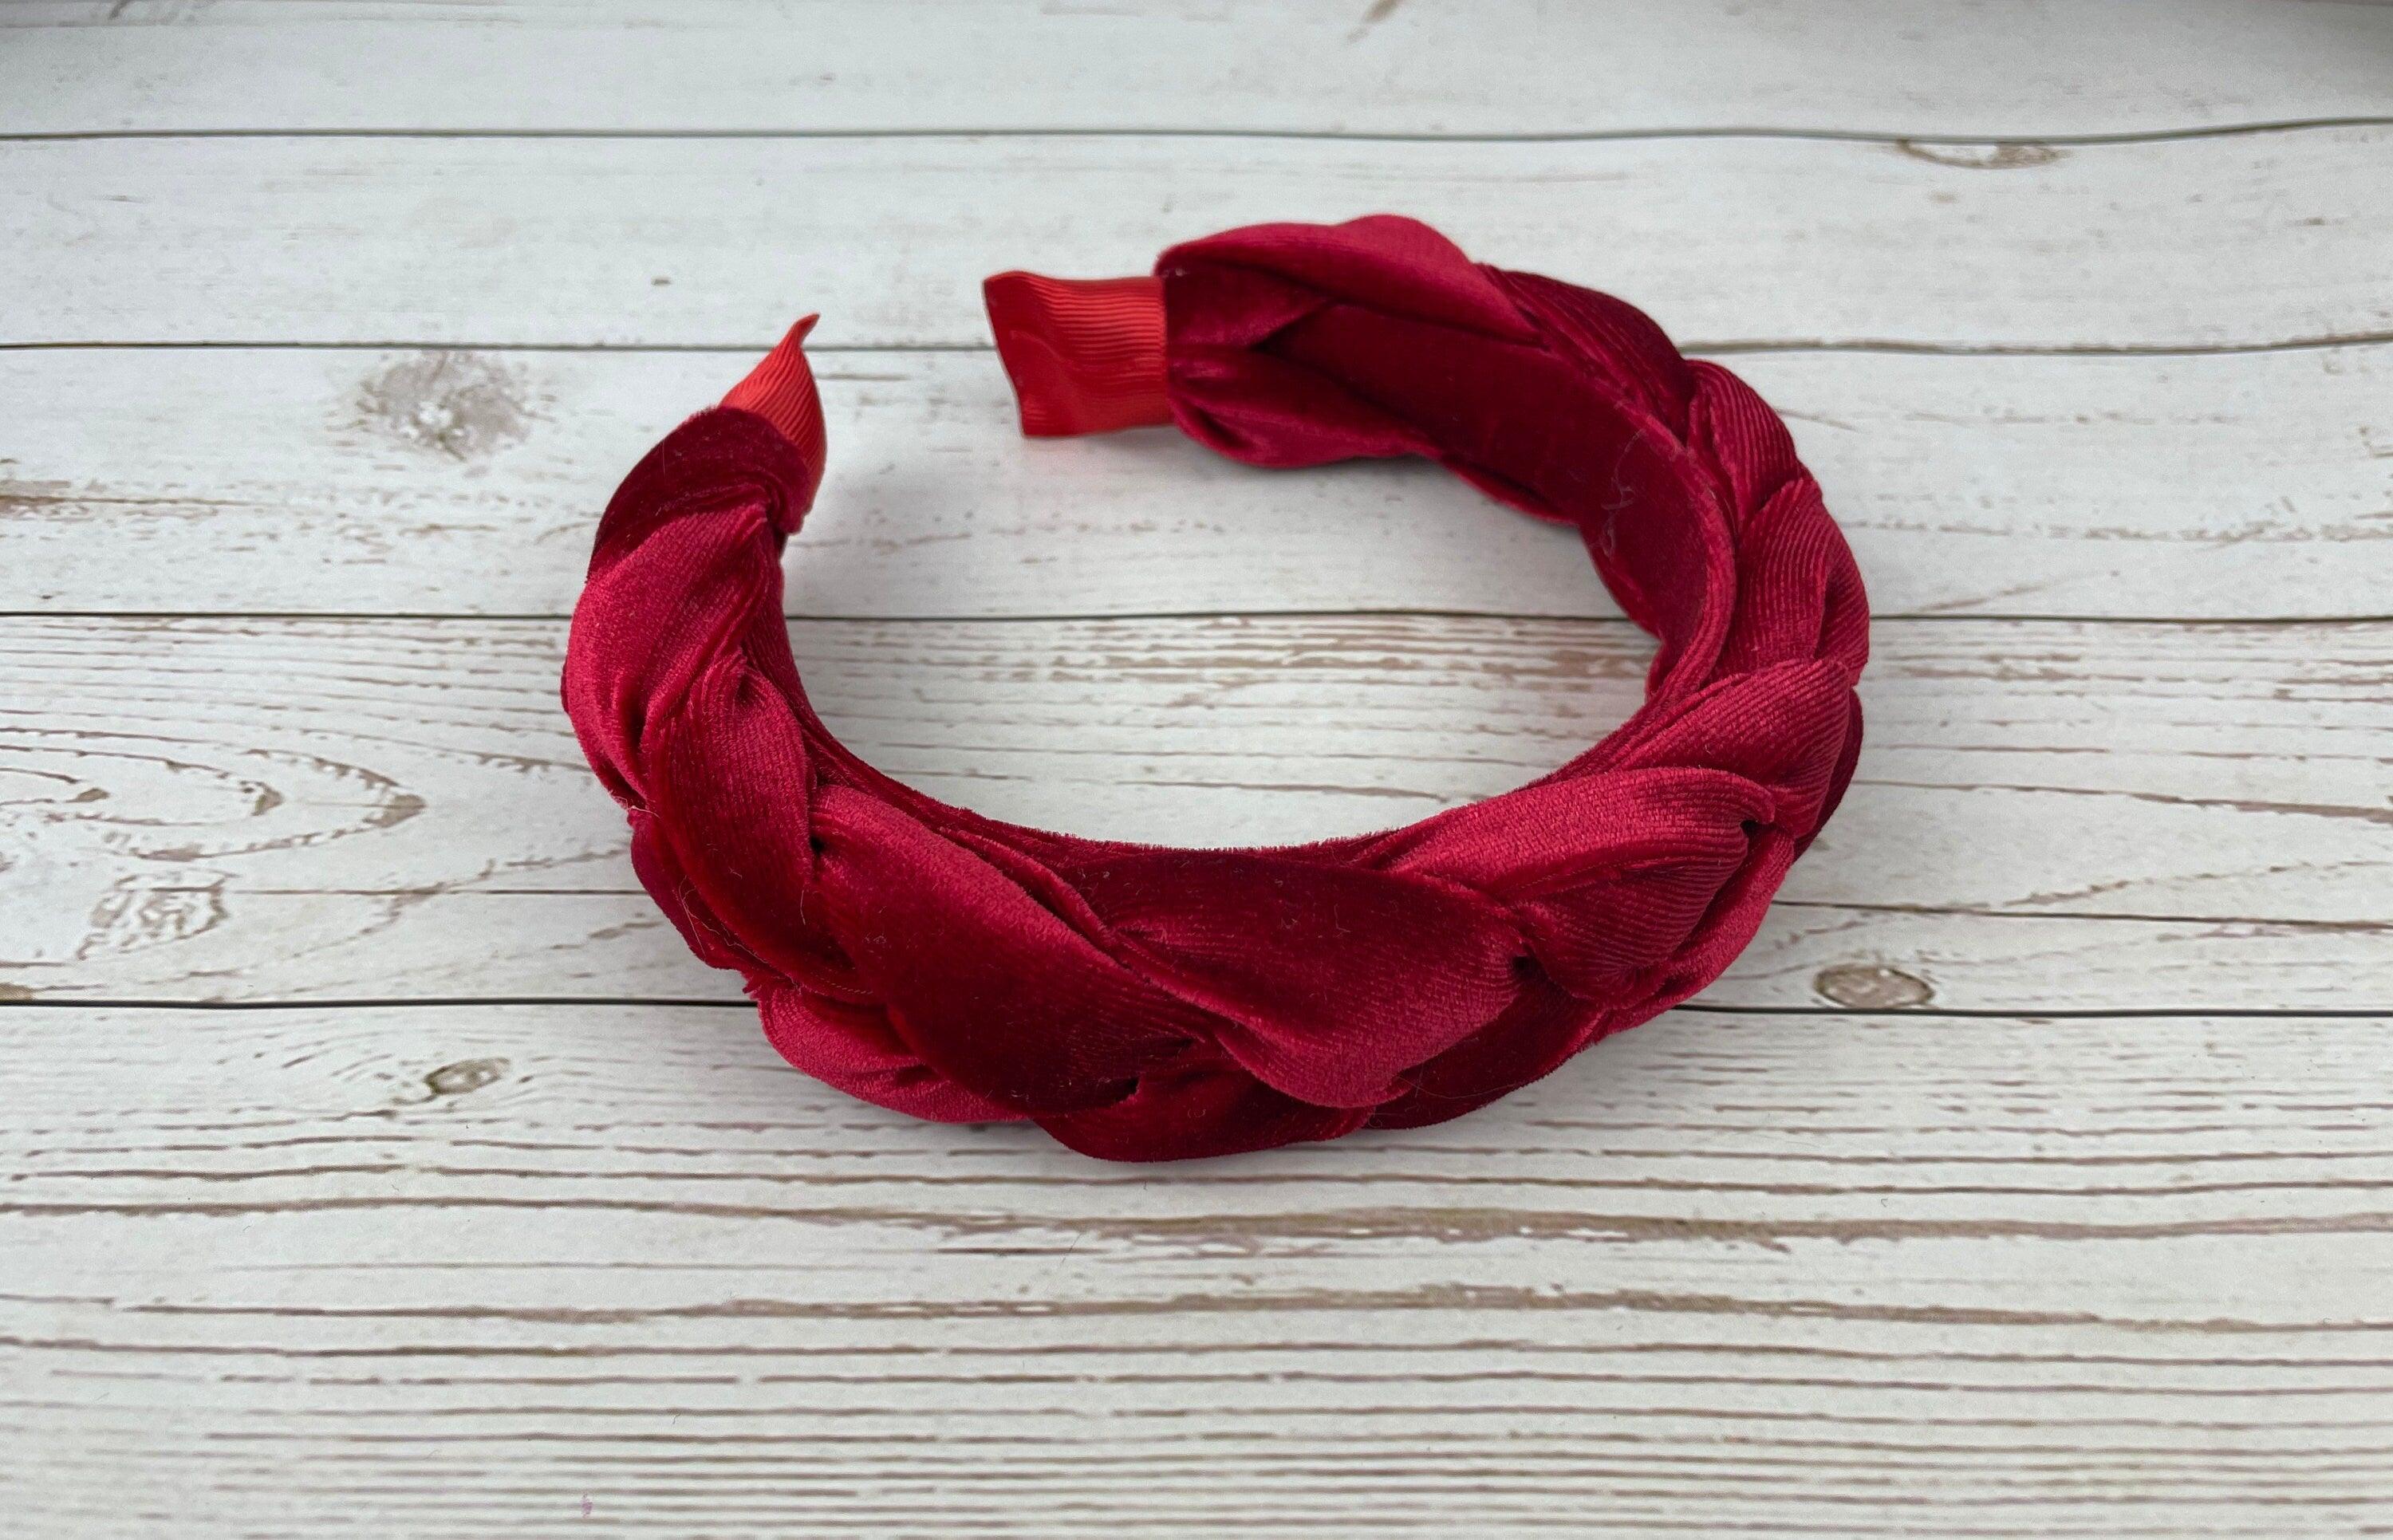 Handcrafted Red Velvet Braided Headband for Women with Padded Stylish Design - Perfect Gift for Her - Handmade Hair Accessory available at Moyoni Design